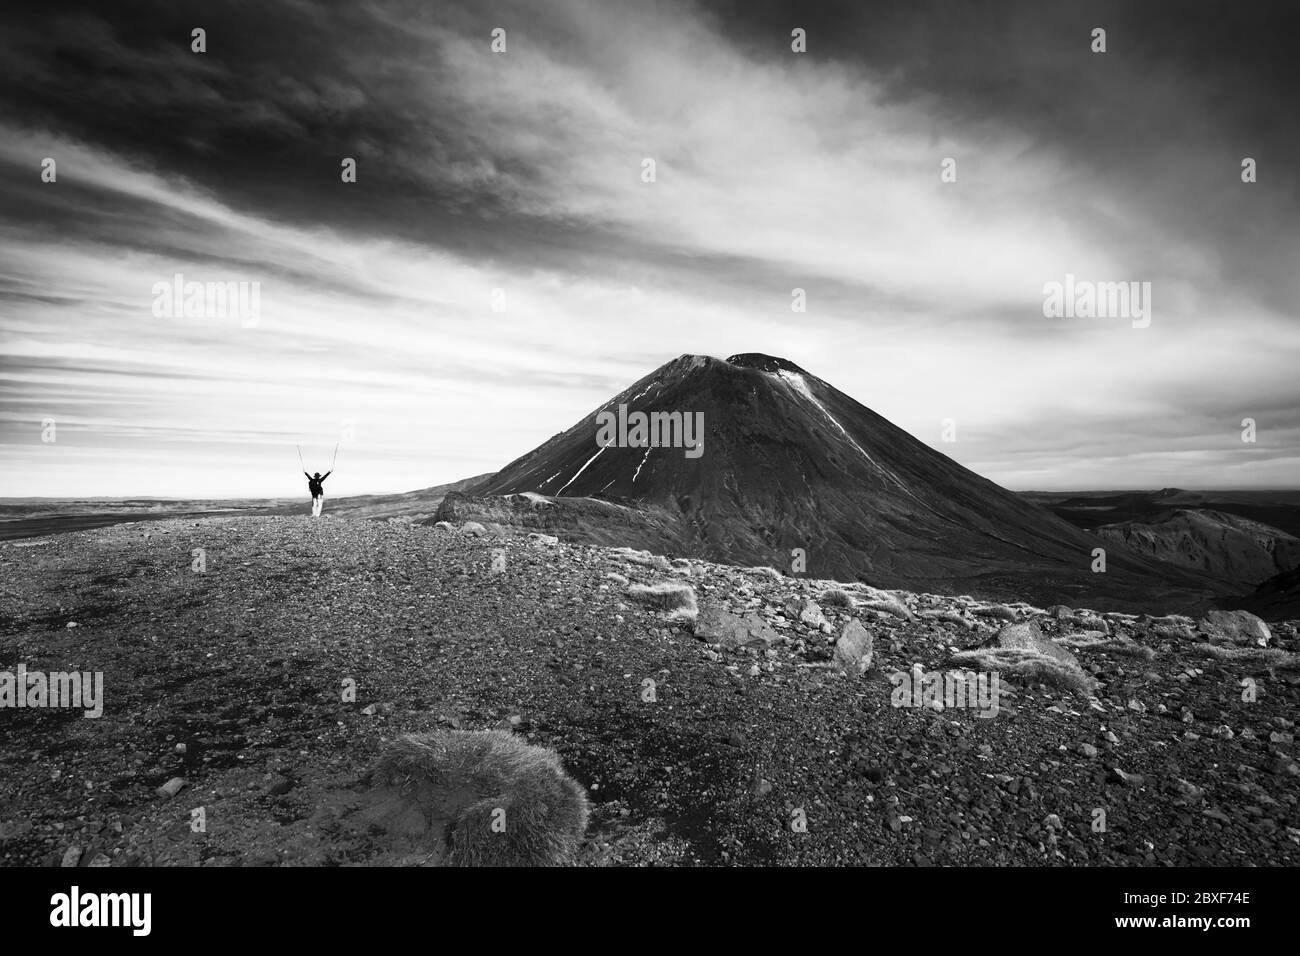 Black and white image of a lone tramper raising arms with the hiking poles, saluting to Mt Ngauruhoe on the Tongariro Alpine Crossing, New Zealand Stock Photo